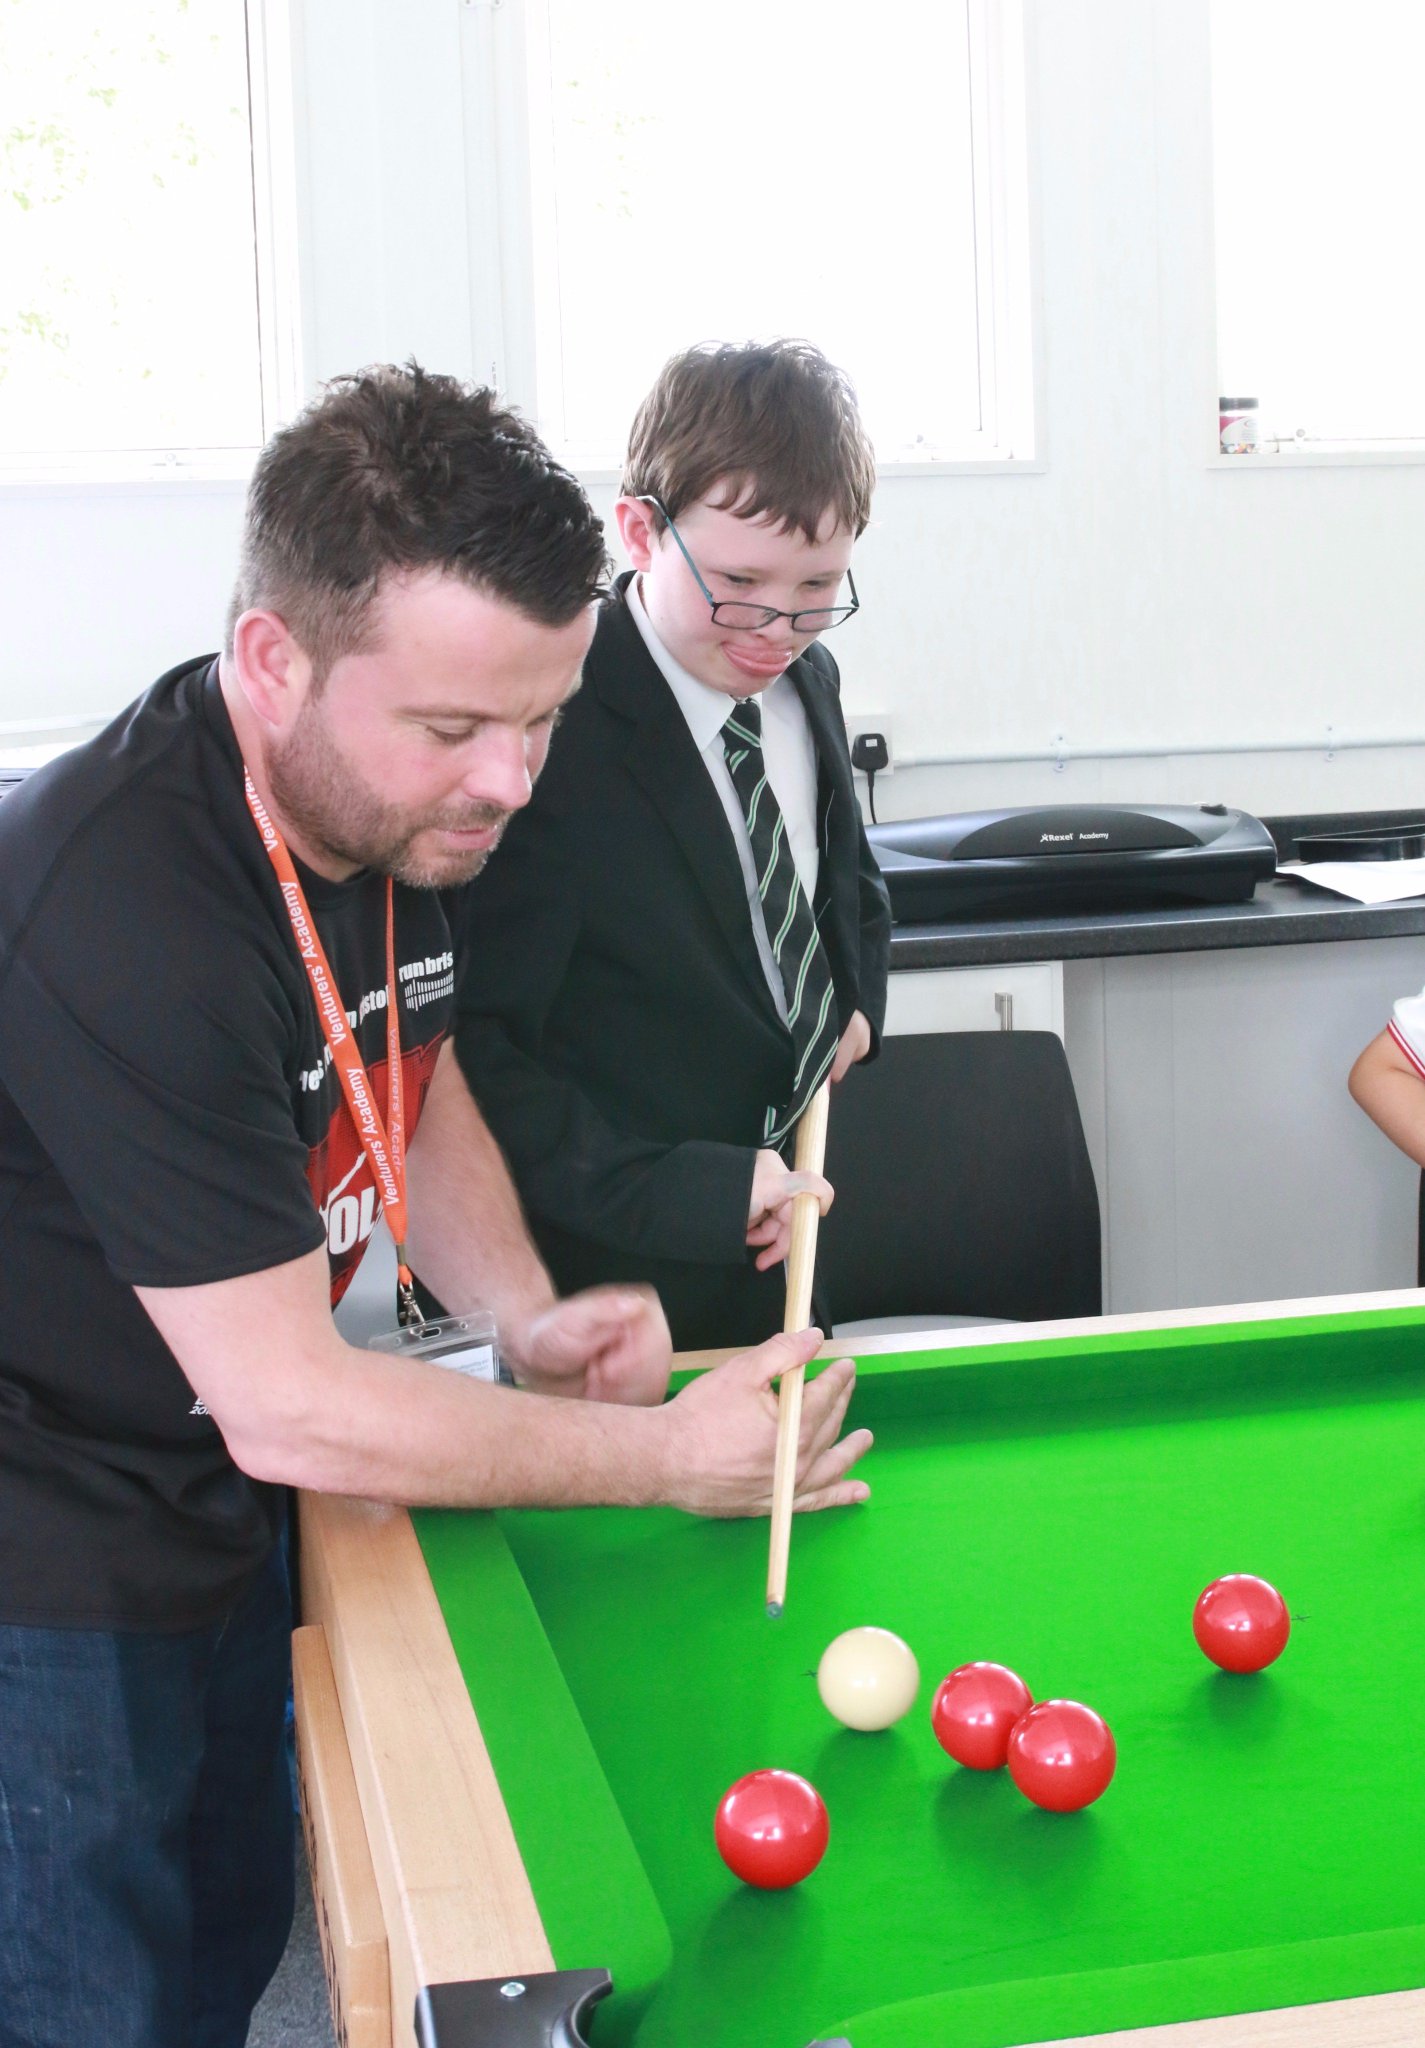 X/ Venturers Academy در X «Boys Club this week learned how to hold a snooker cue and tried out the Academys new donated snooker table #Snooker https//t.co/KQhBE4GtAn 